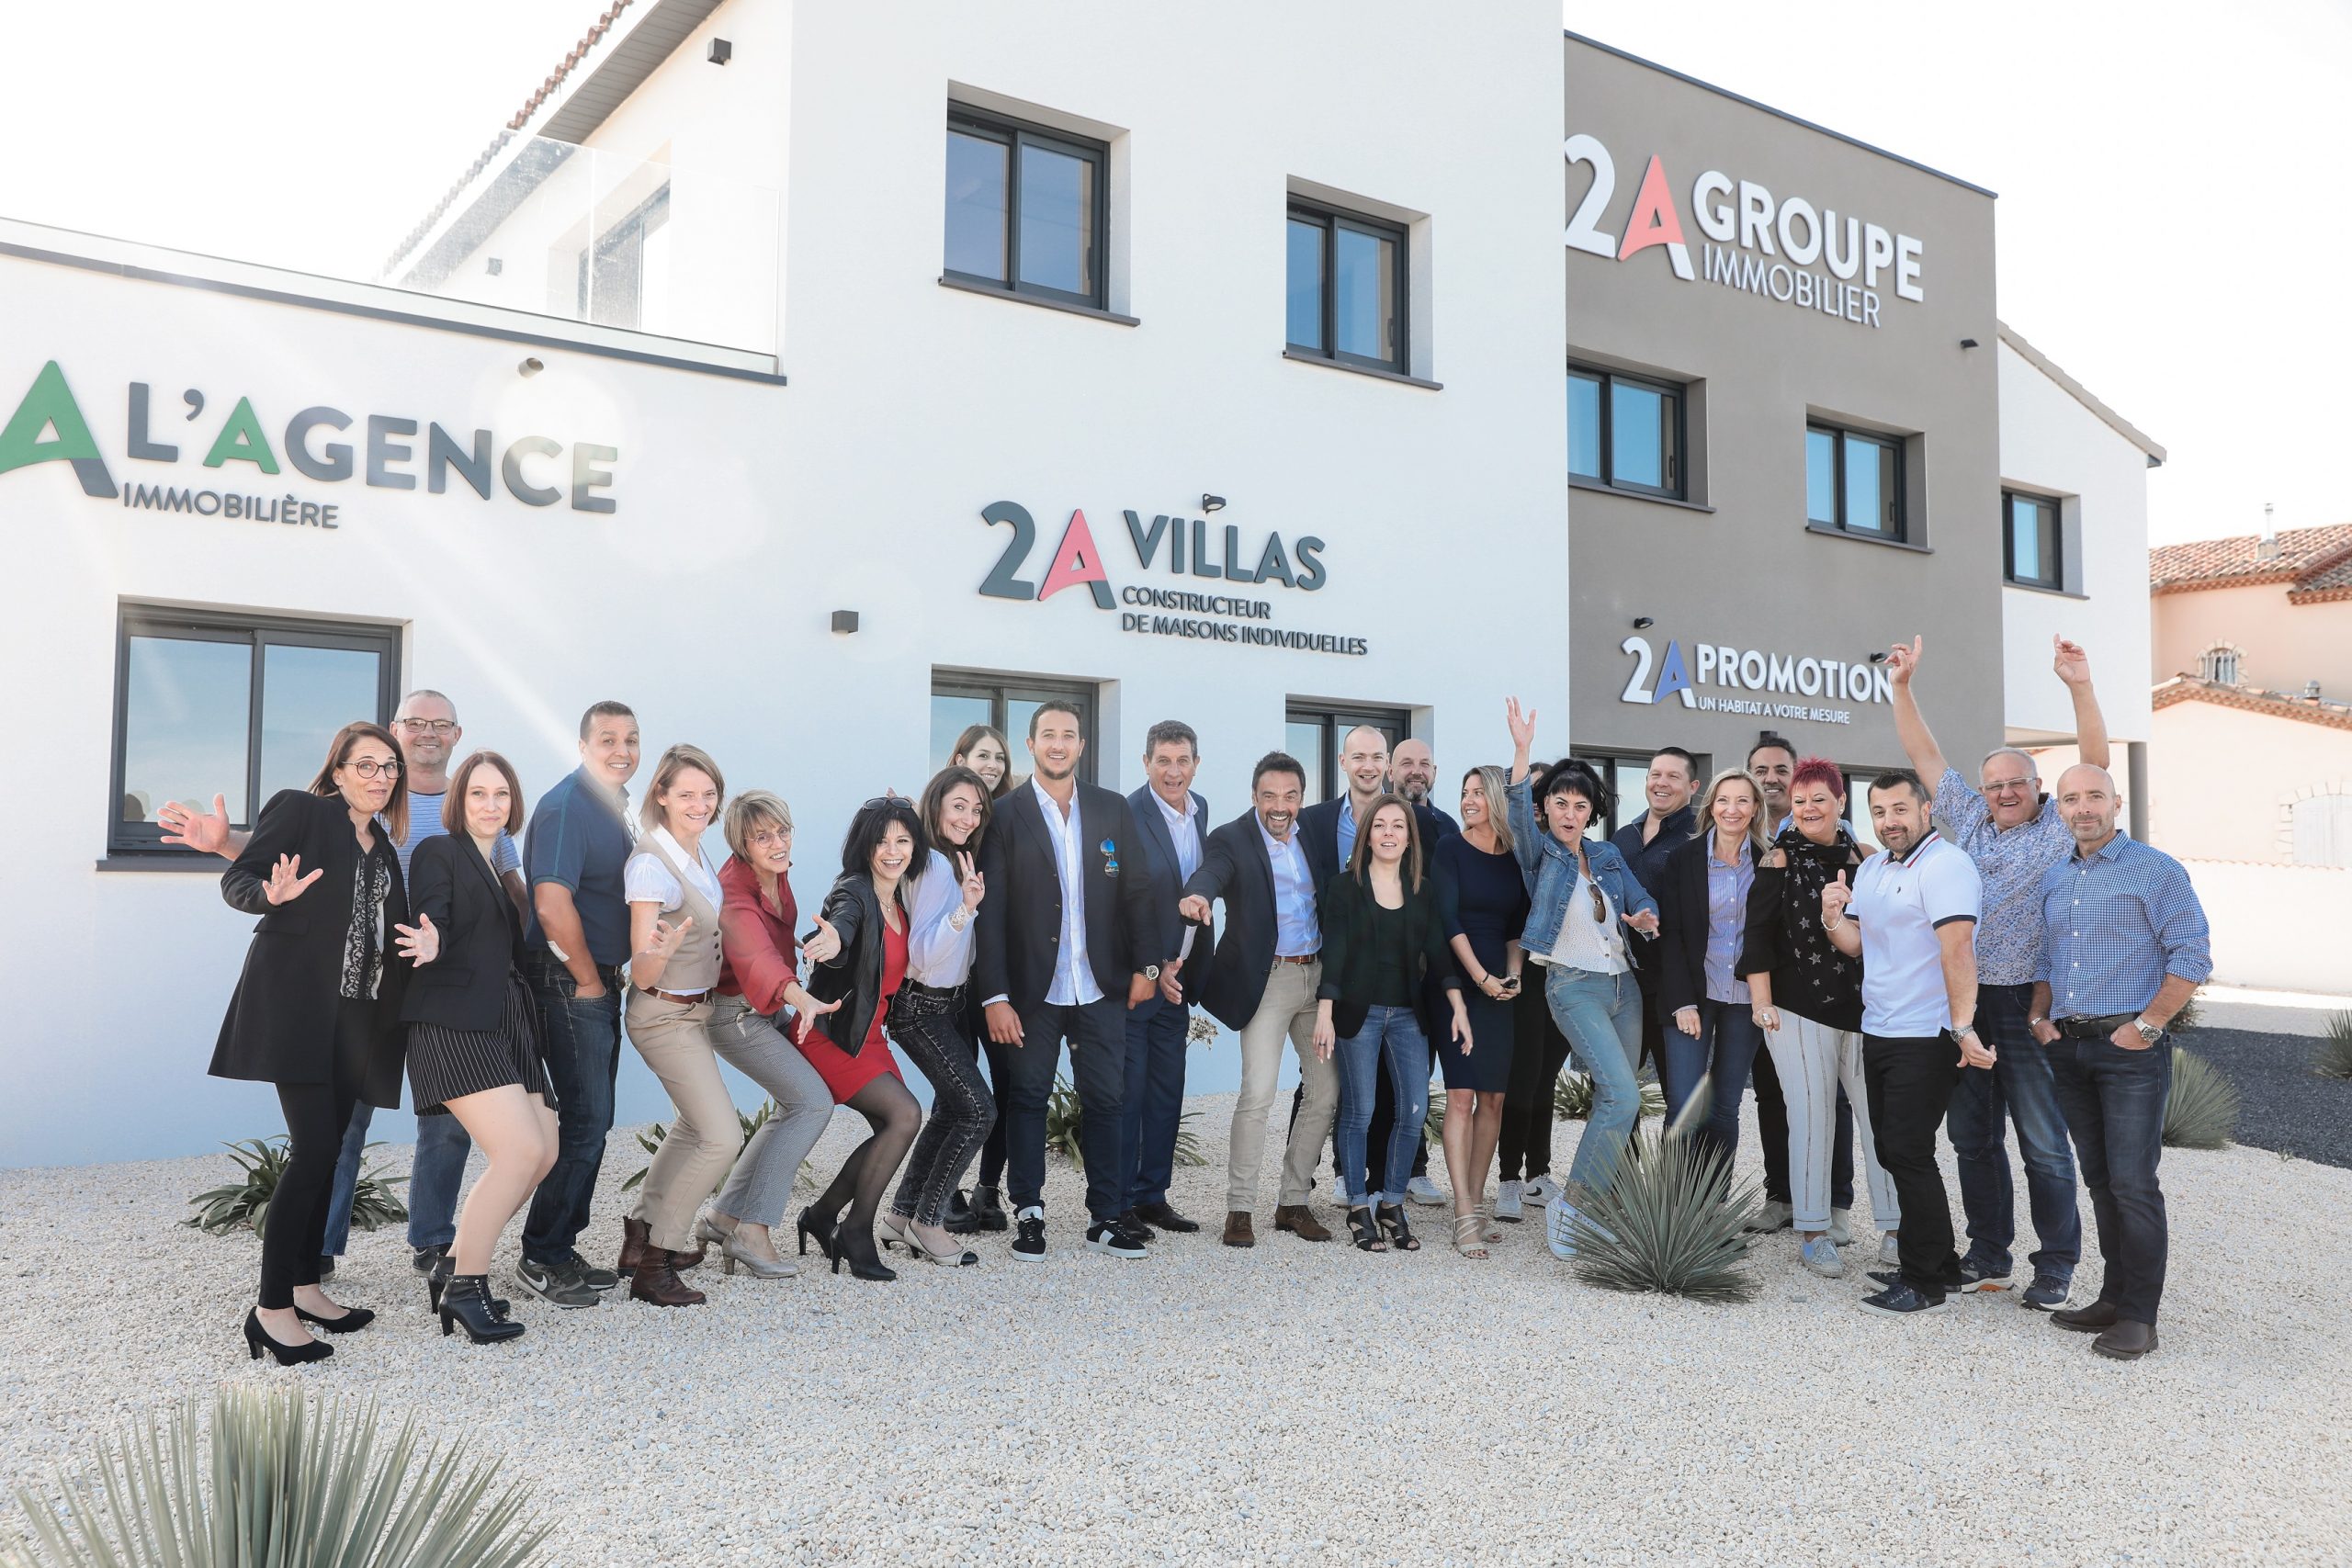 Equipe 2A Groupe Immobilier